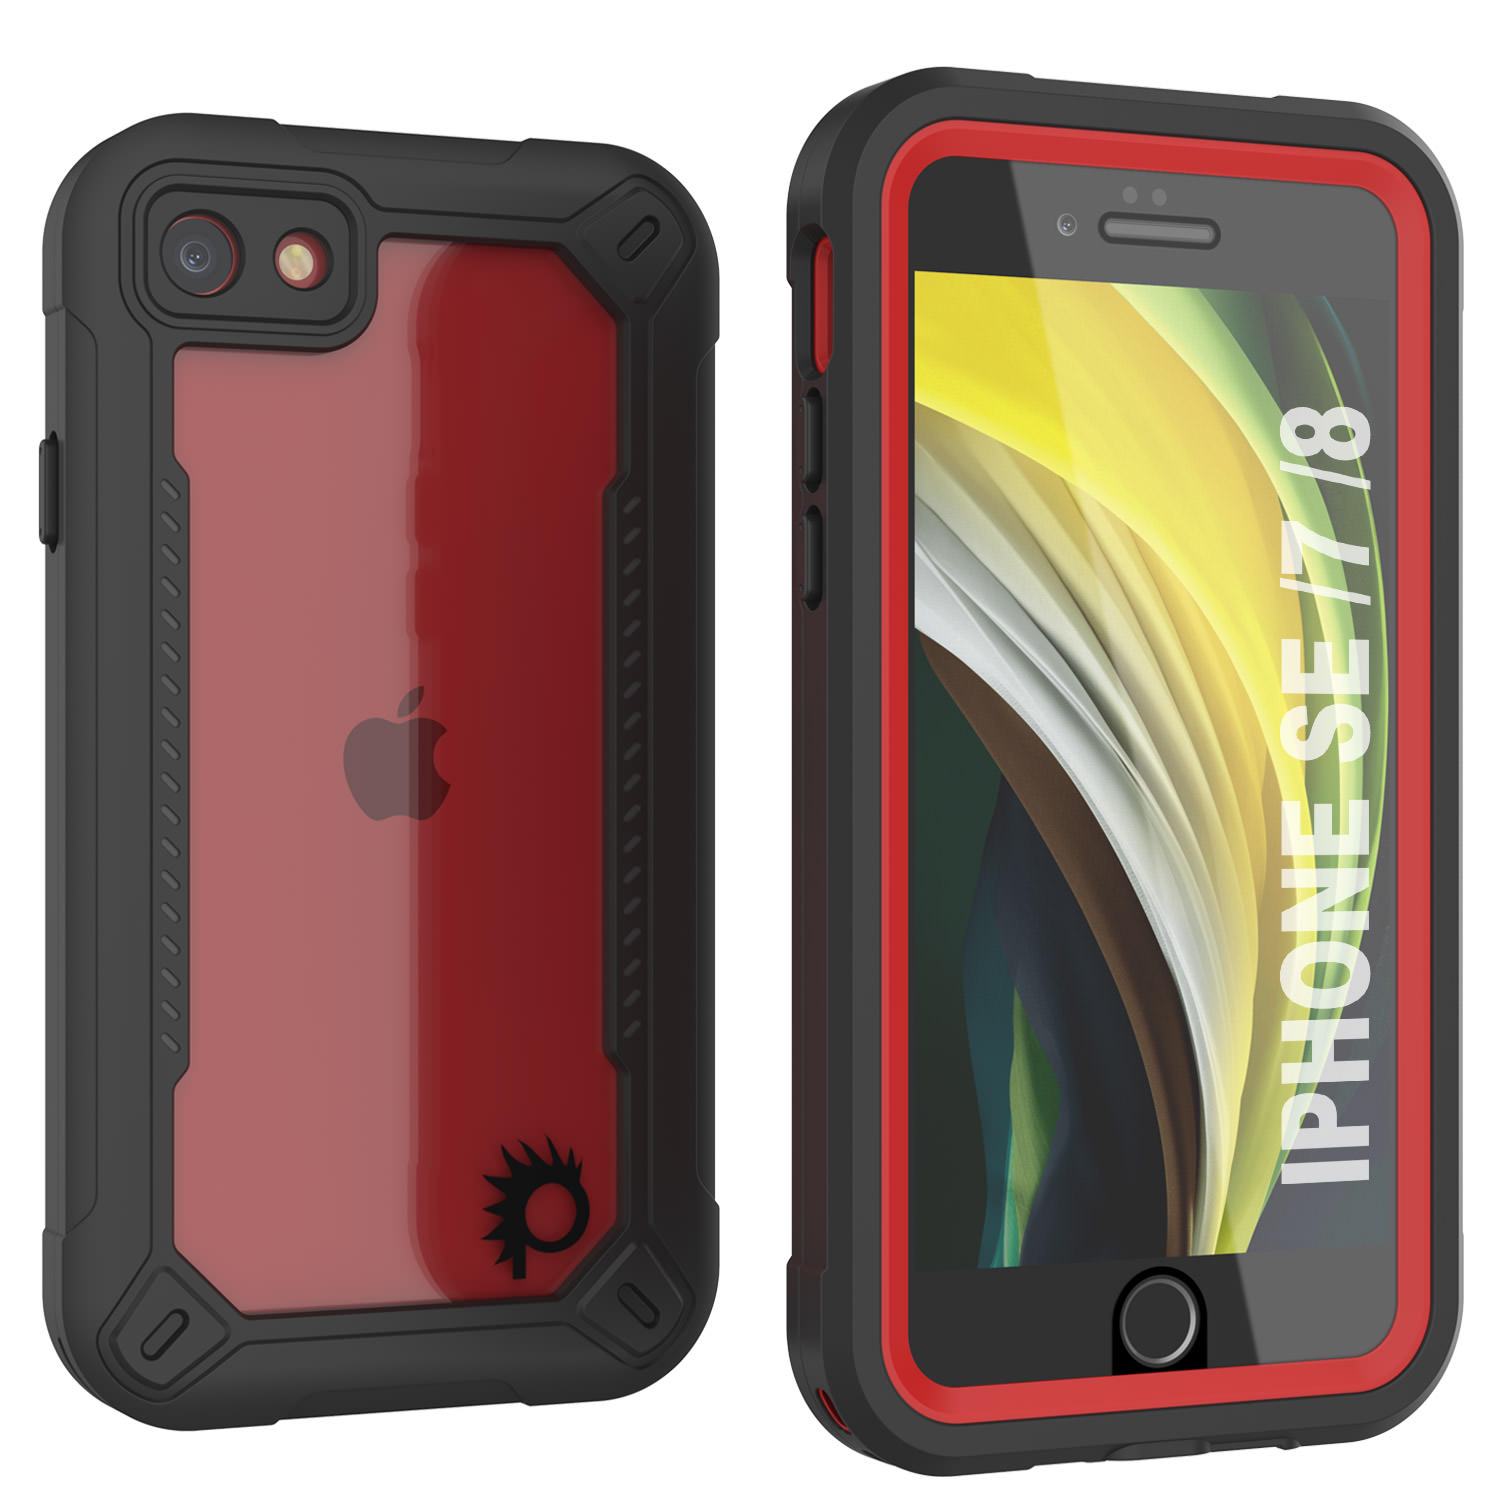 iPhone 7 Waterproof IP68 Case, Punkcase [red]  [Maximus Series] [Slim Fit] [IP68 Certified] [Shockresistant] Clear Armor Cover with Screen Protector | Ultimate Protection (Color in image: red)